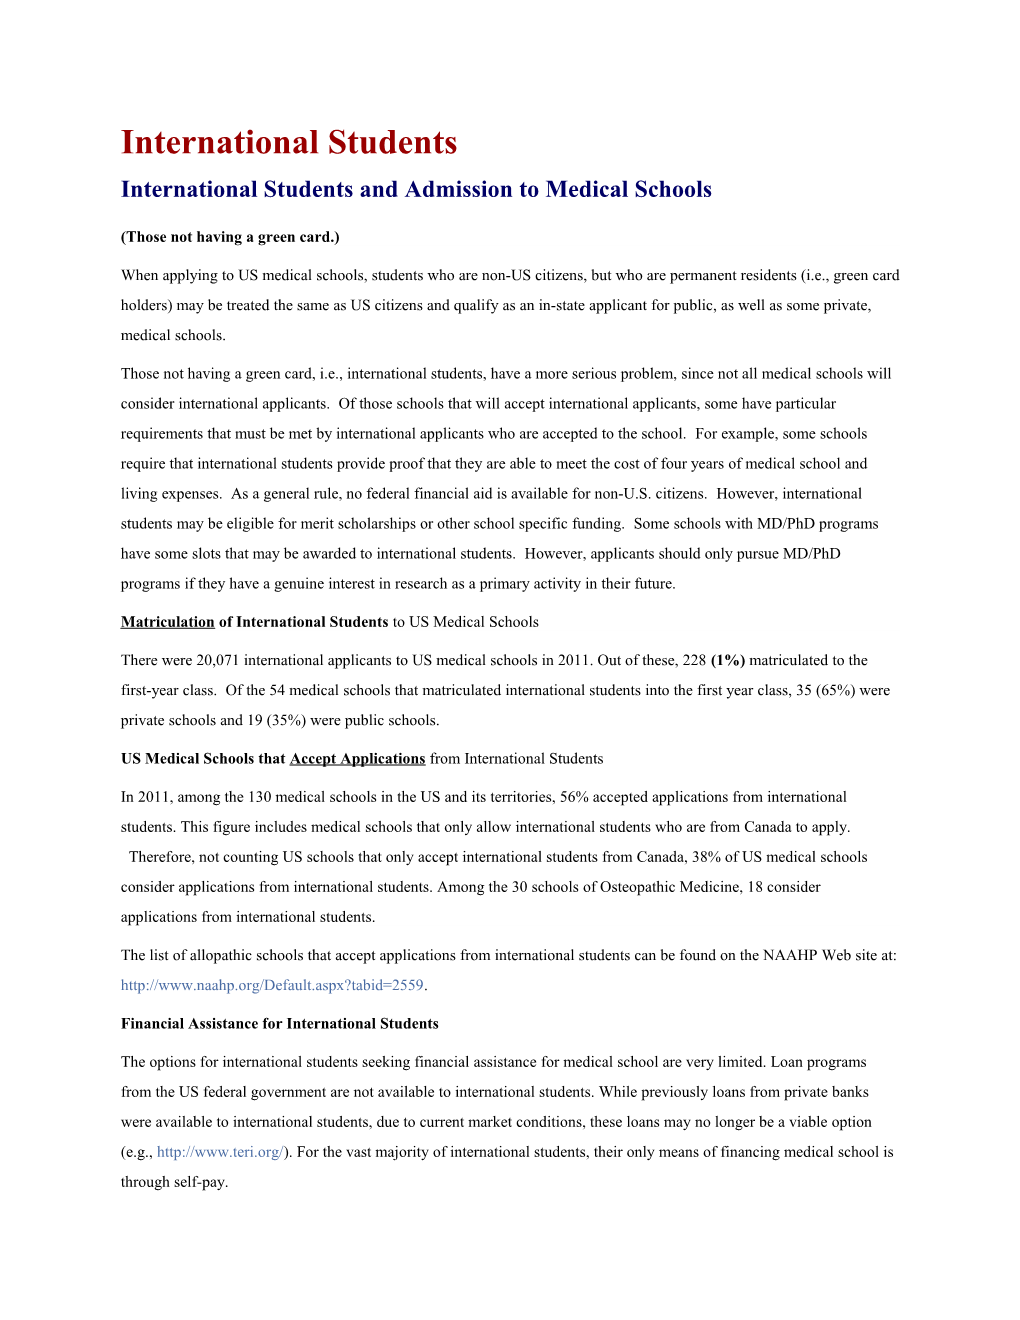 International Students and Admission to Medical Schools